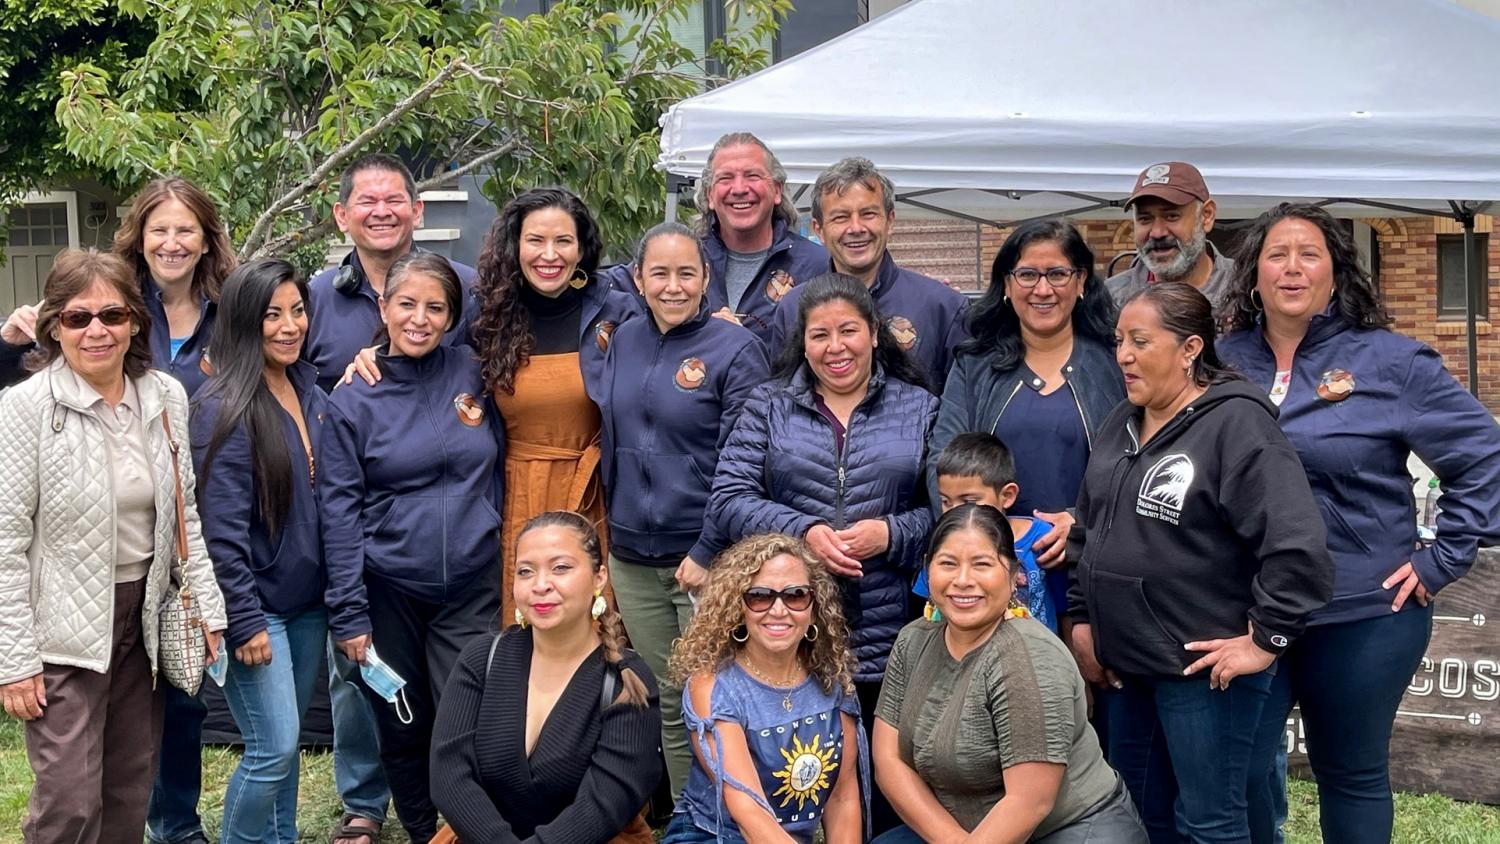 Comunidad Contra Covid (CCC) gather for a photo in a local SF park. These healthcare workers pose with Drs. Alicia Fernandez and Marlene Martin from UCSF Latinx Center Of Excellence and Thomas Knoble from San Francisco Department of Public Health